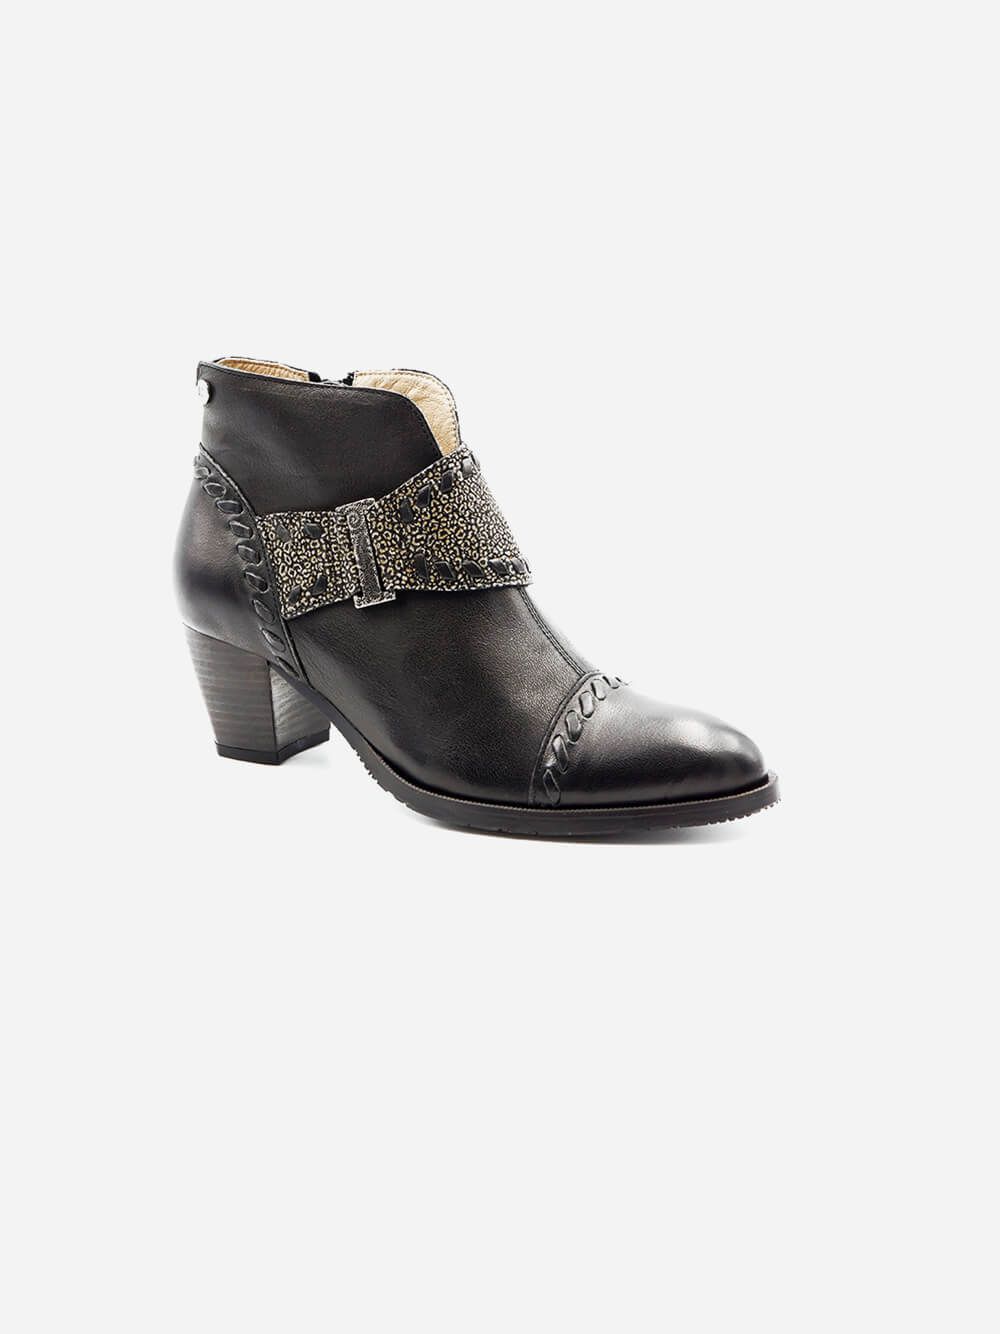 Mareesa Black Ankle Boots | Dkode